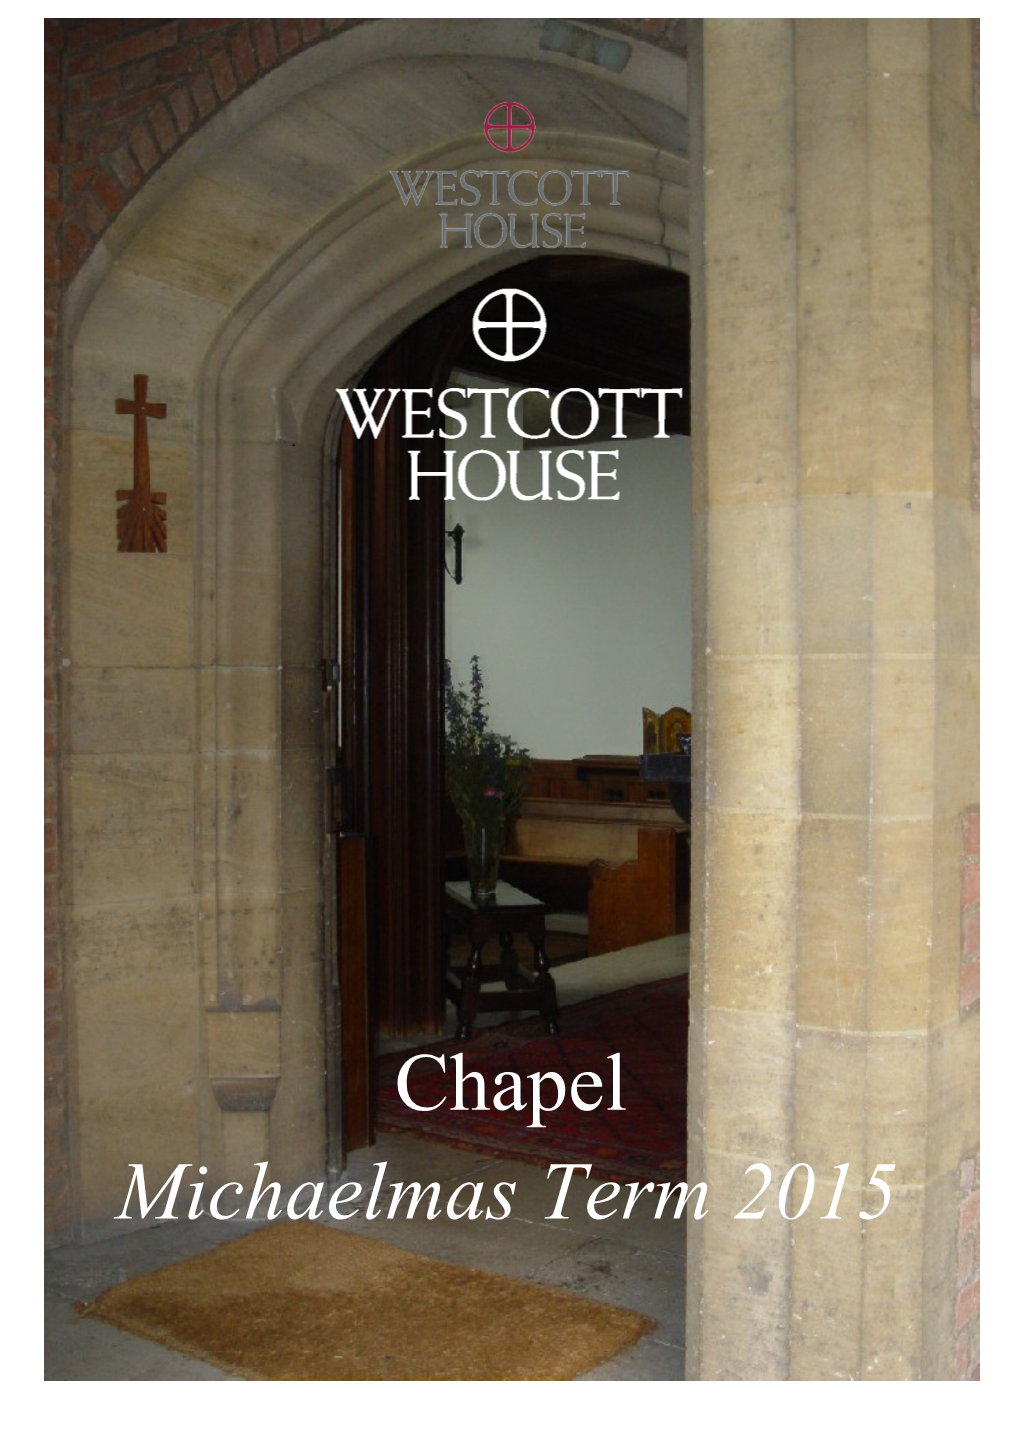 Regular Weekly Chapel Services